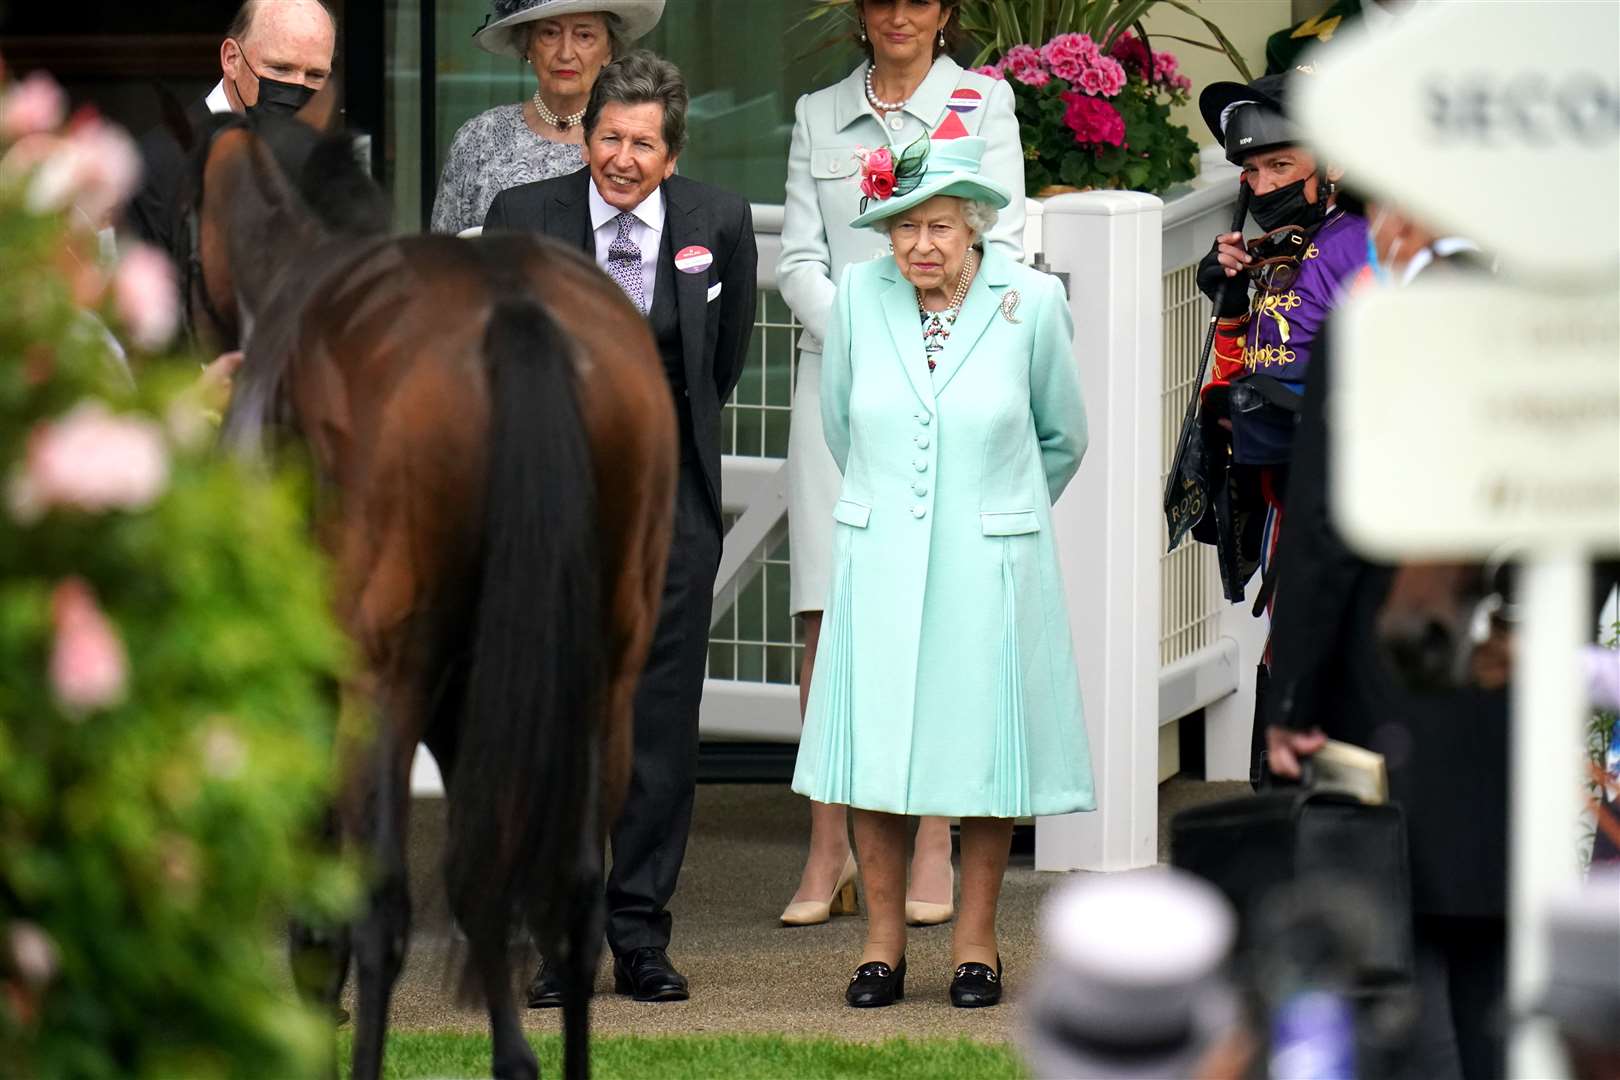 Queen Elizabeth with her racing manager John Warren and jockey Frankie Dettori inspect the monarch’s horse Reach For The Moon during Royal Ascot in 2021 (Andrew Matthews/PA)